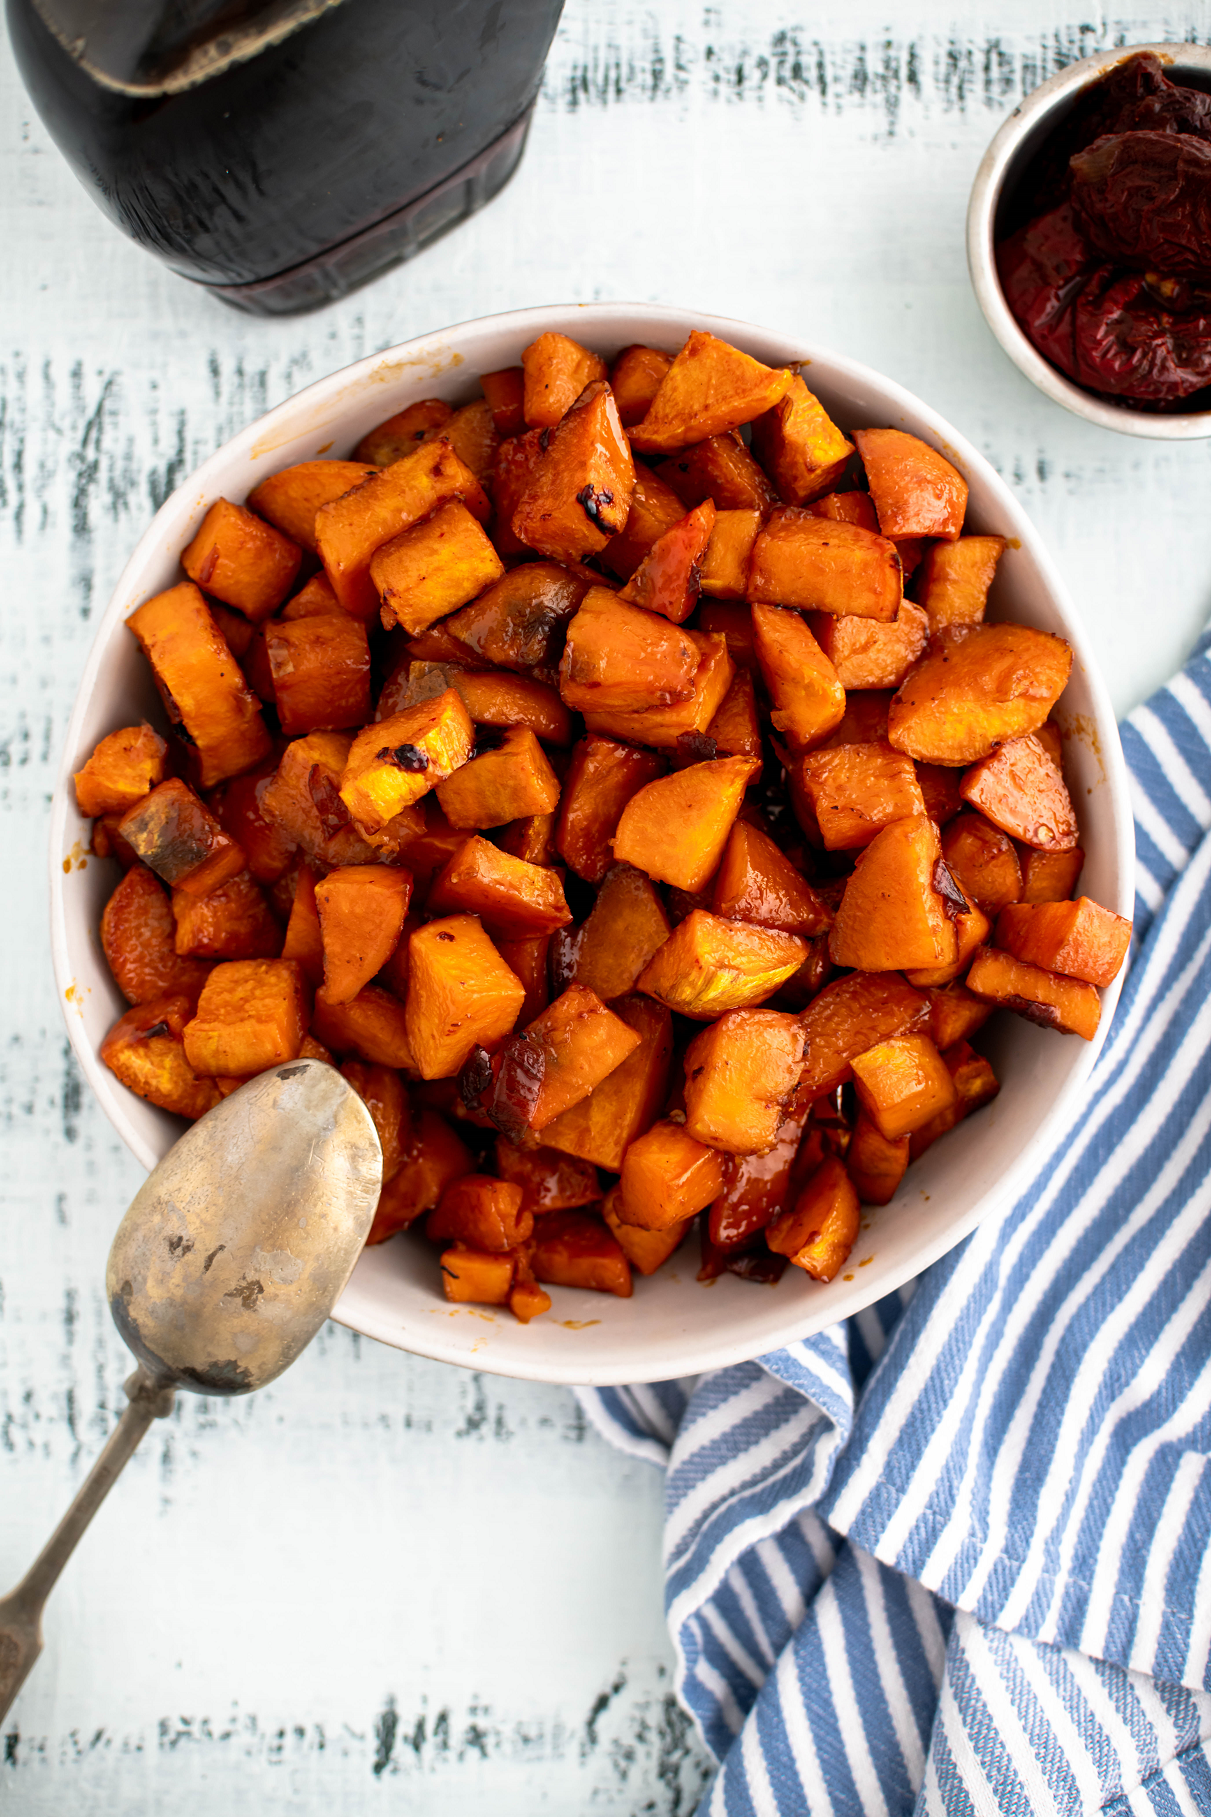 Cream colored bowl filled with diced roasted sweet potatoes. Bottle of pure maple syrup in the background.